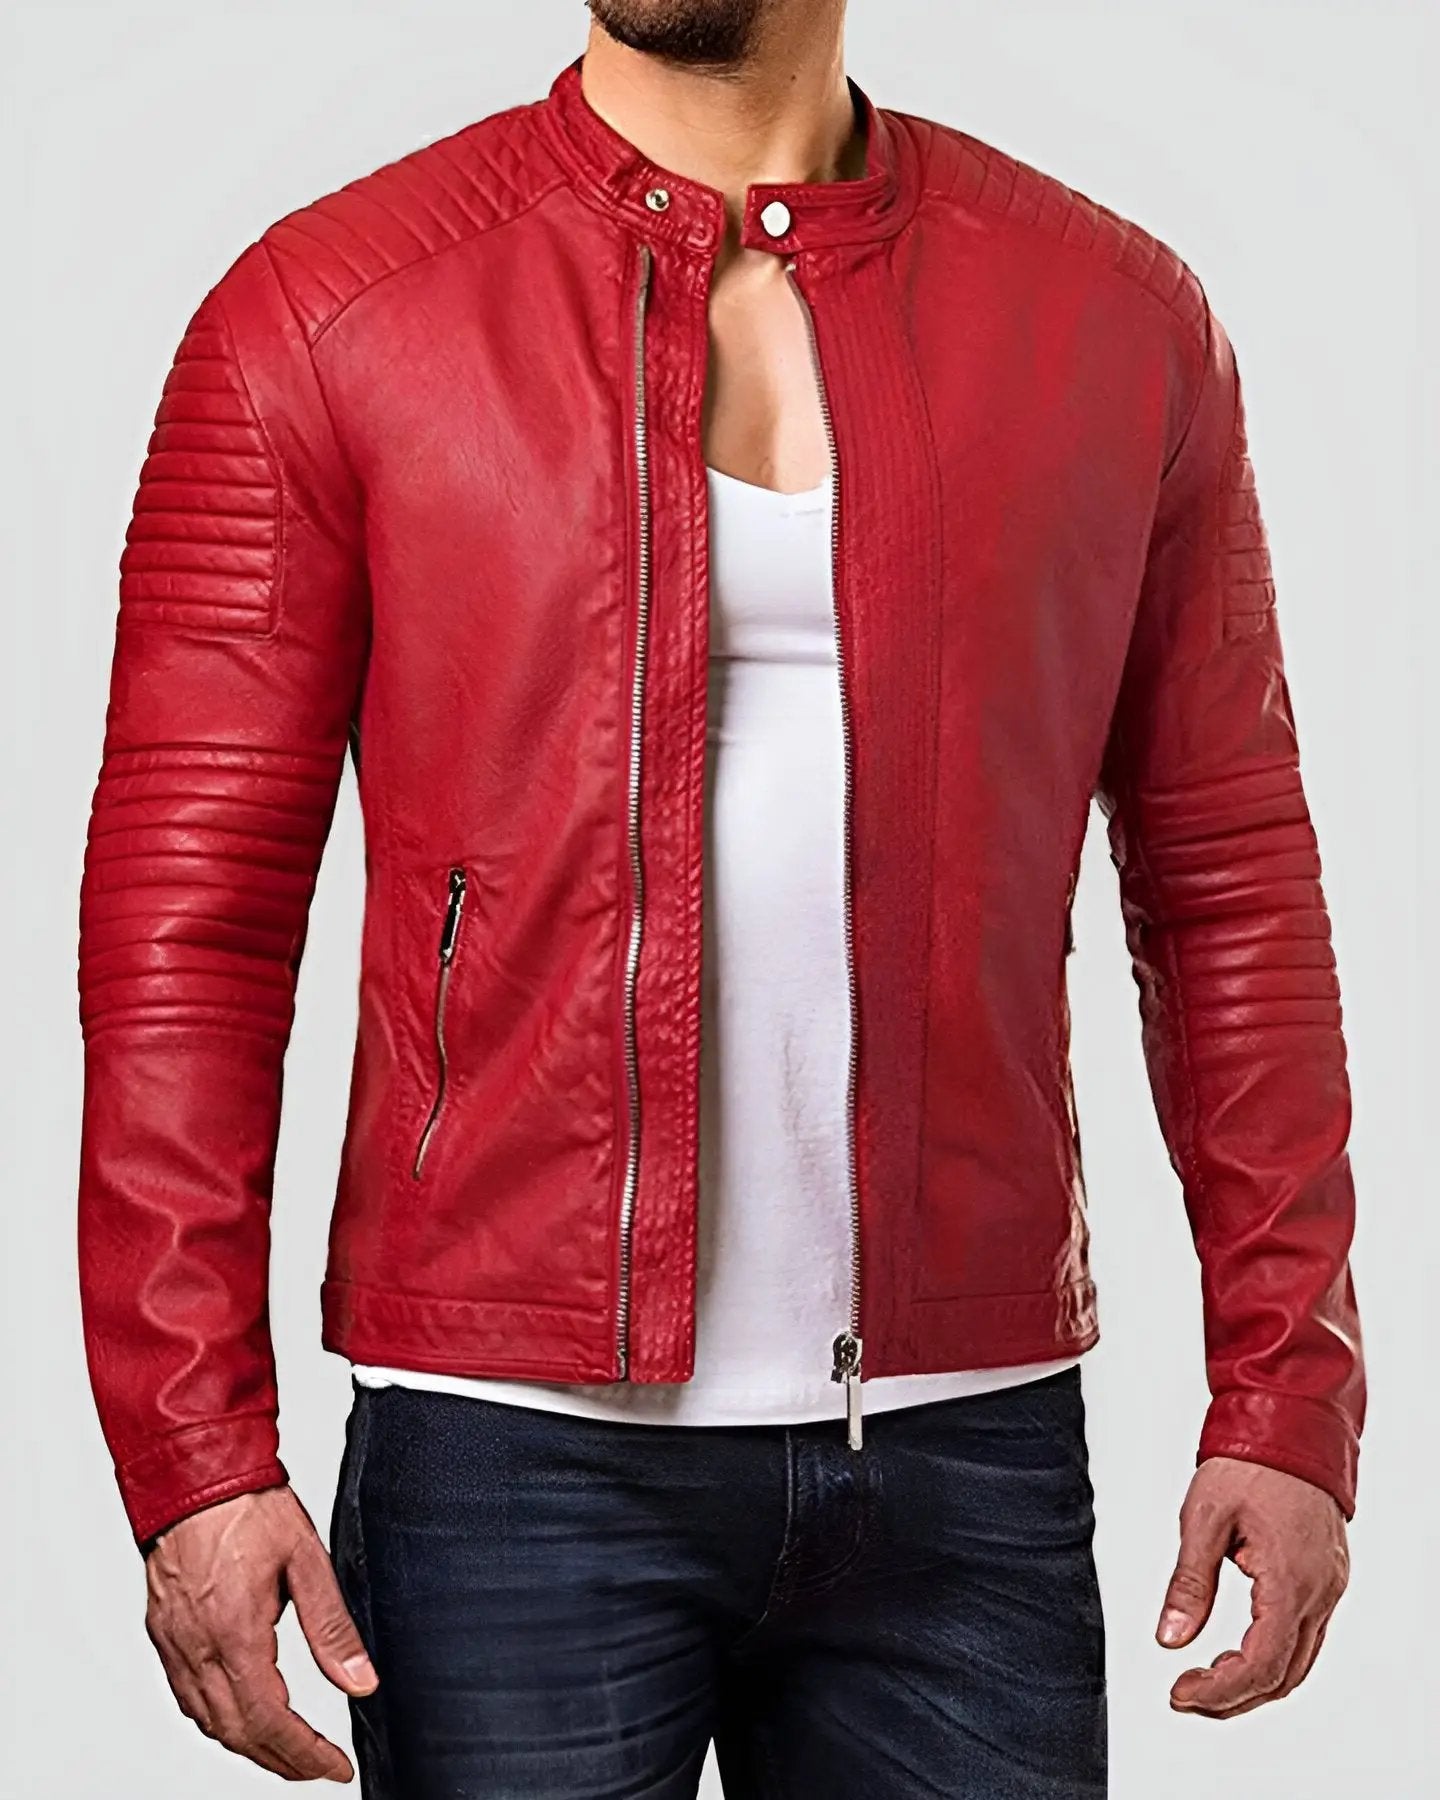 Mens Red Leather Jackets